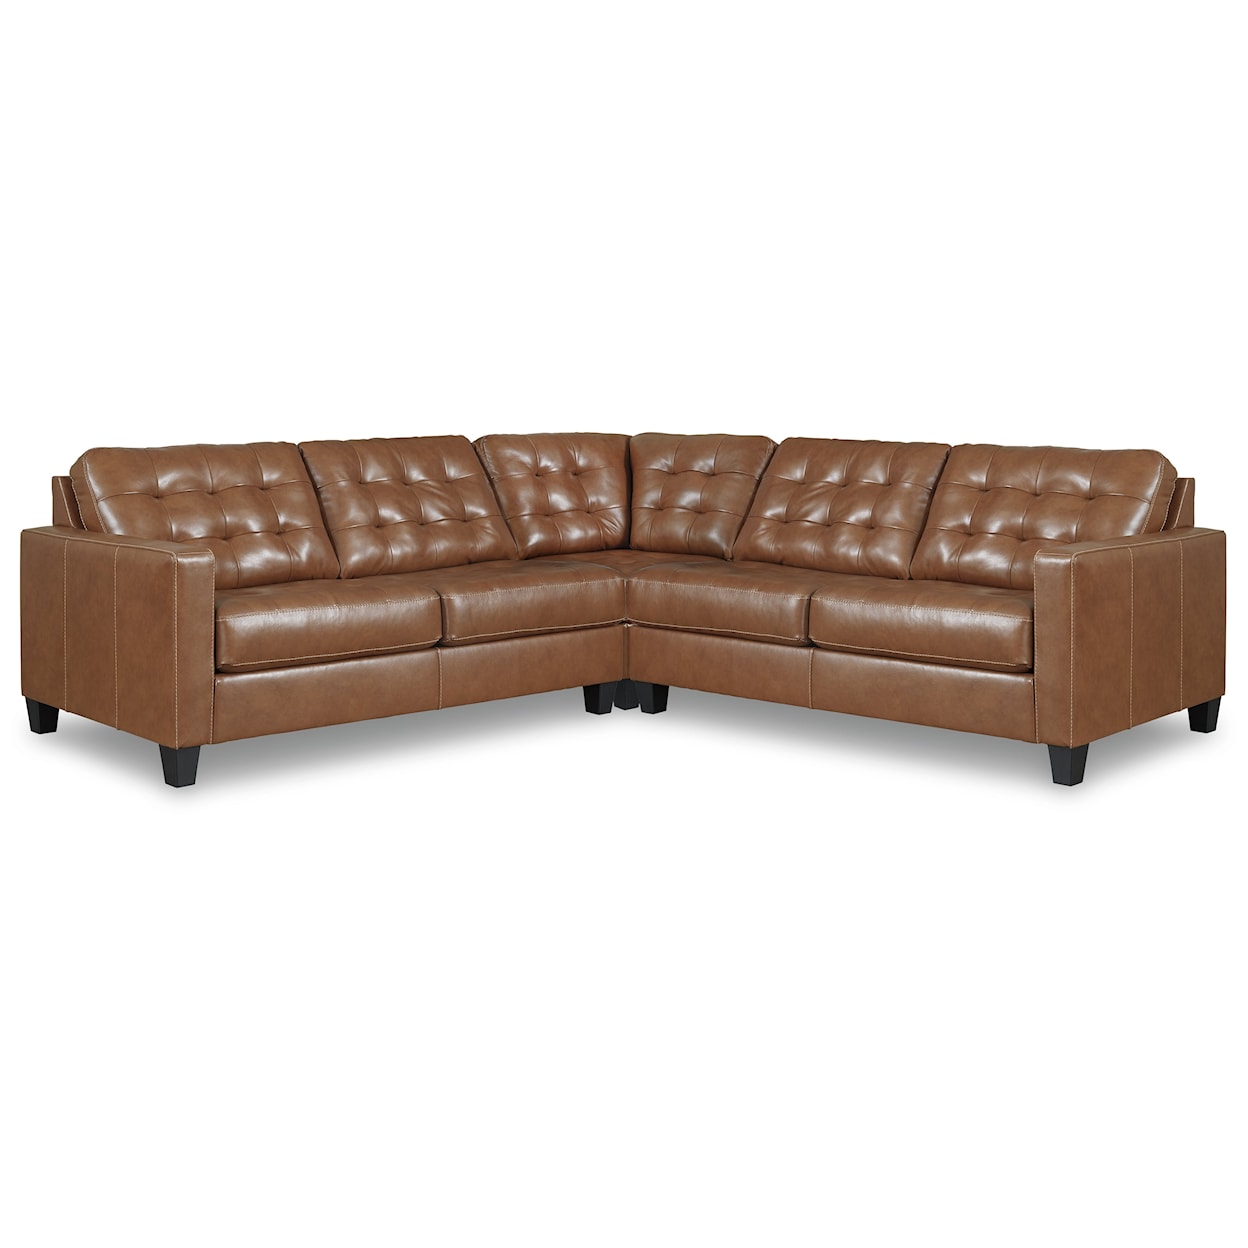 Signature Design by Ashley Furniture Baskove 3-Piece Sectional